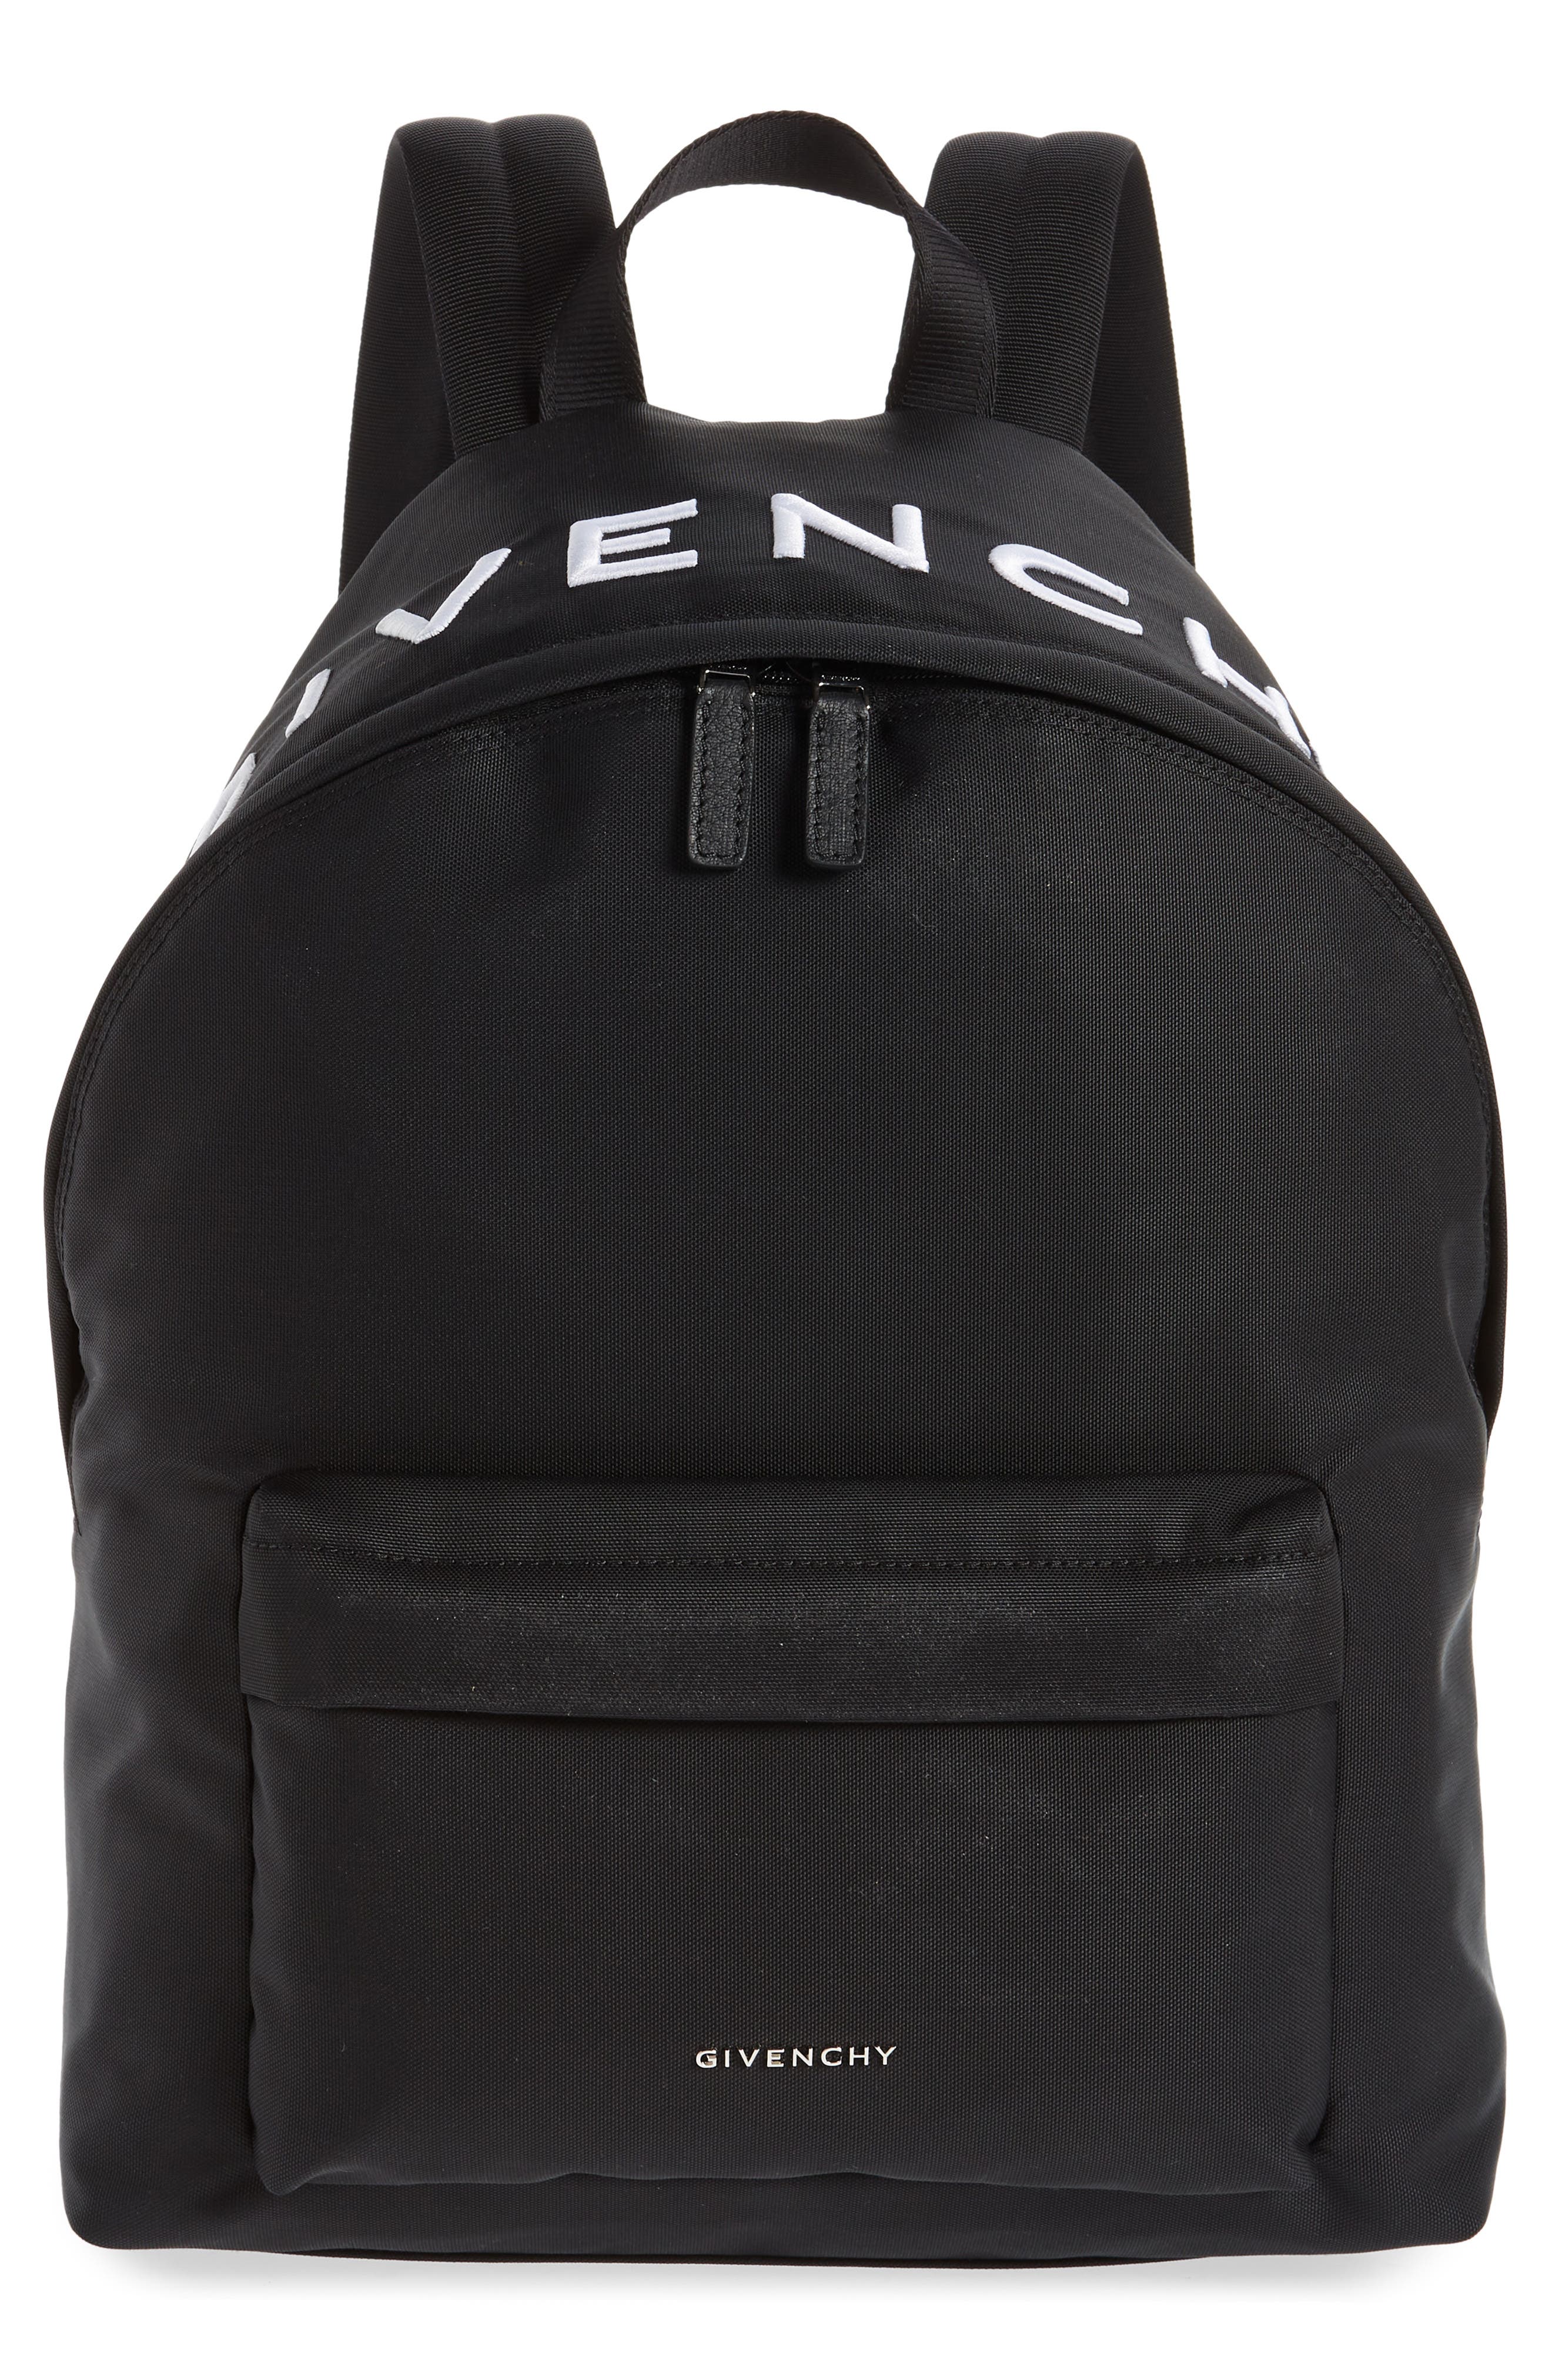 Givenchy Essential Canvas Backpack in 001-Black at Nordstrom